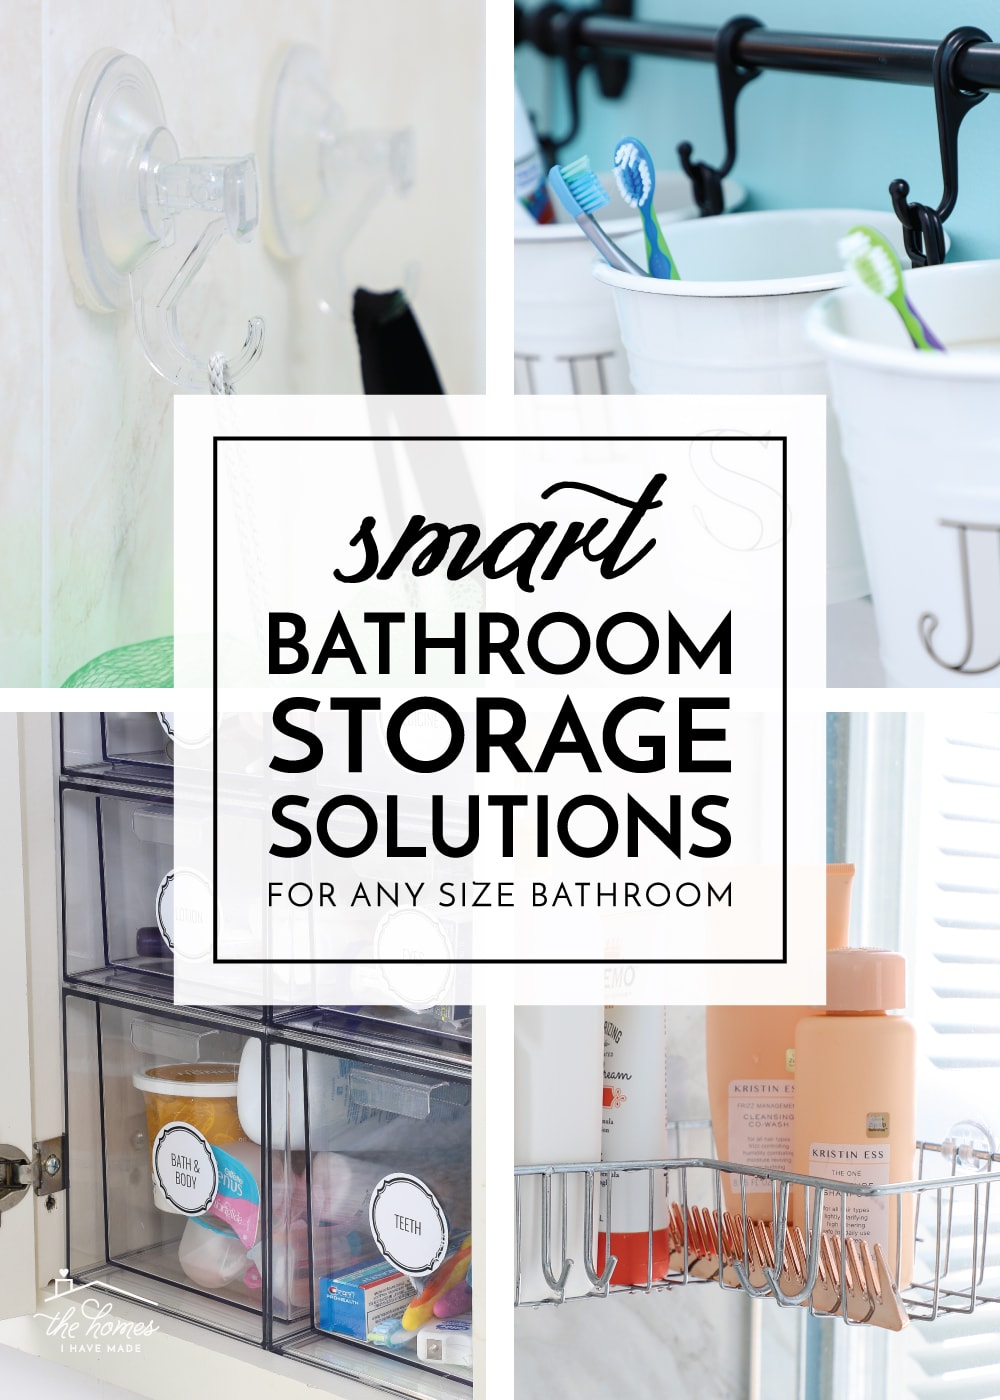 A gallery of 4 images with various bathroom storage ideas and text overlay